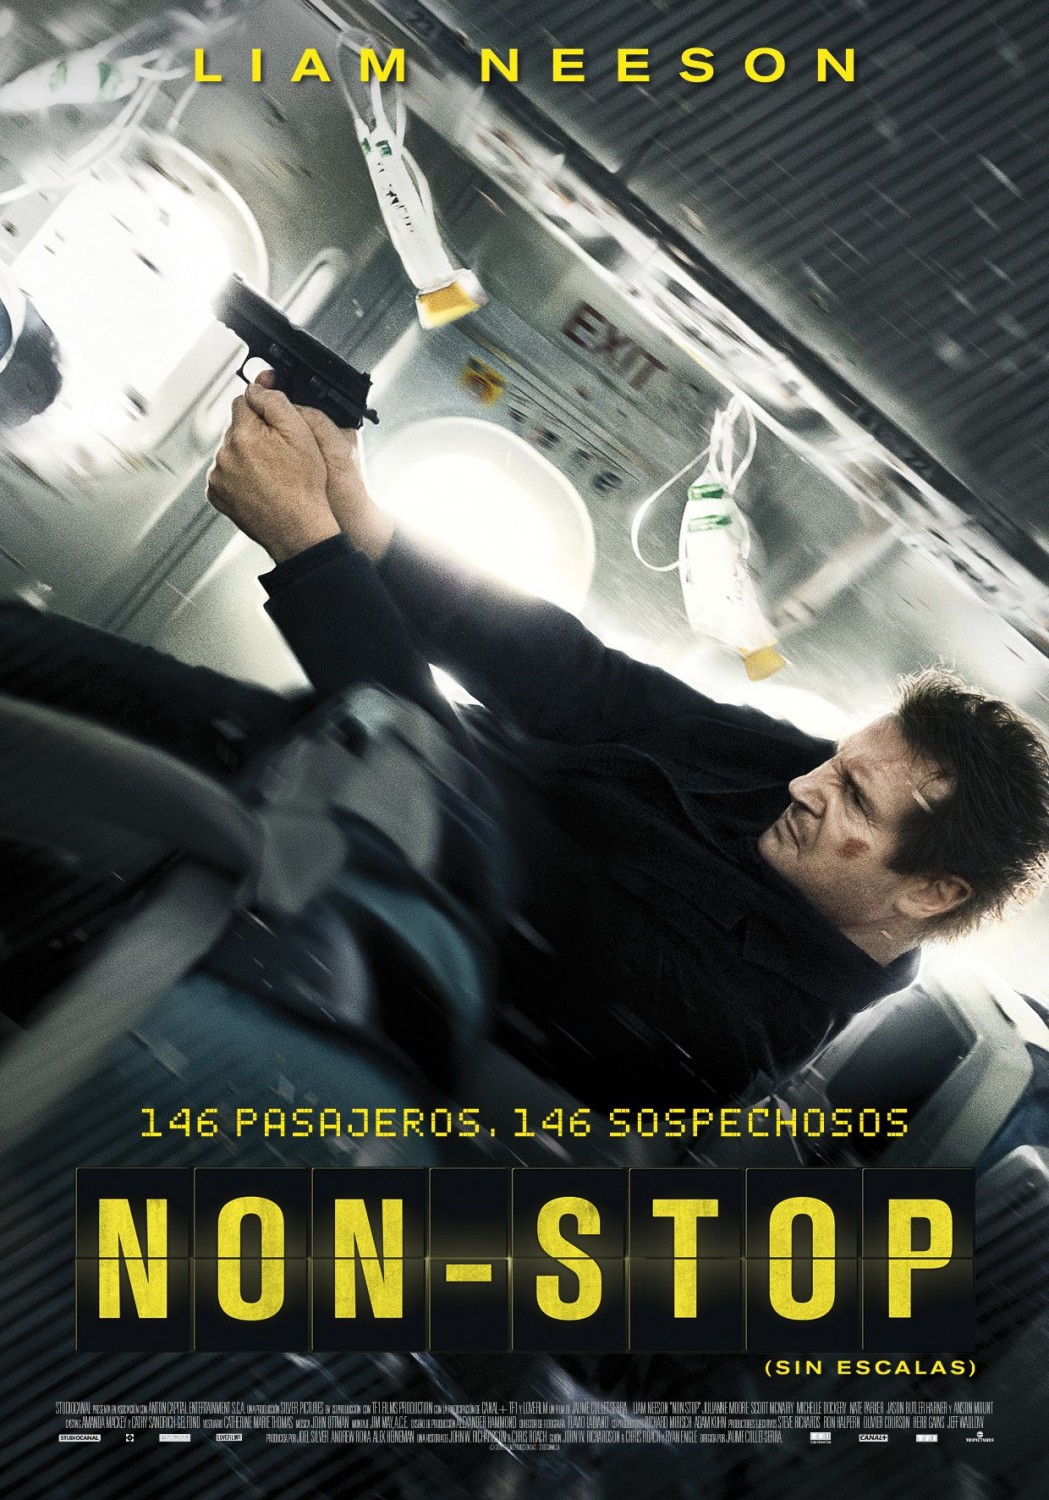 NonStop Movie (2014) Review by Tiffany Yong Actor Film Critic